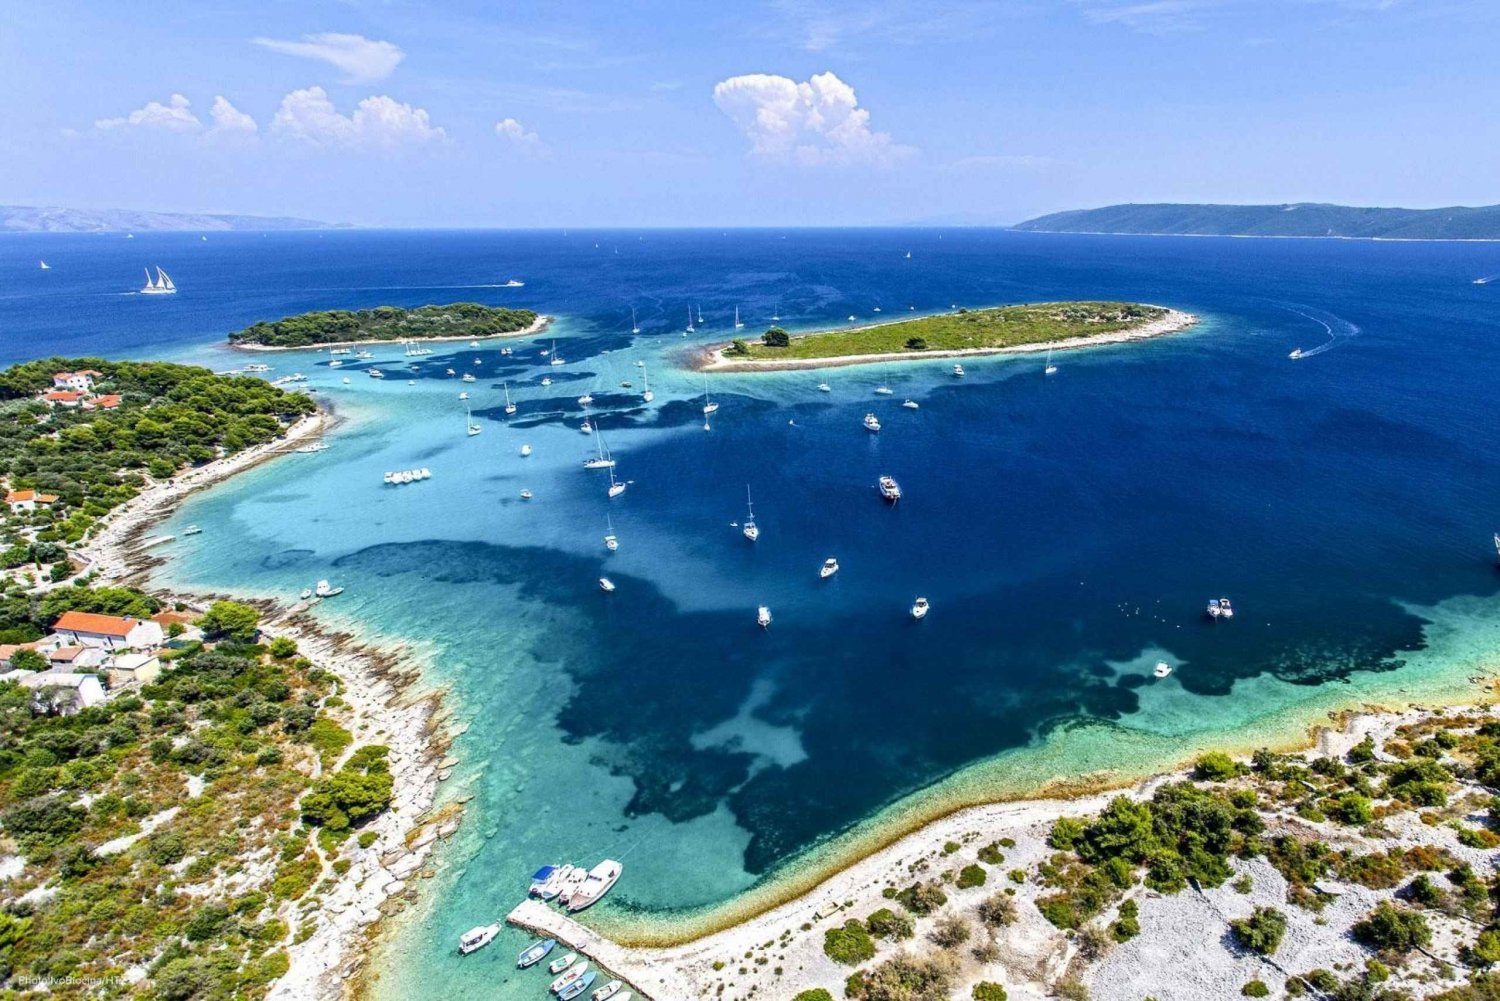 Half-Day Boat Tour to Blue Lagoon, Shipwreck, and Trogir